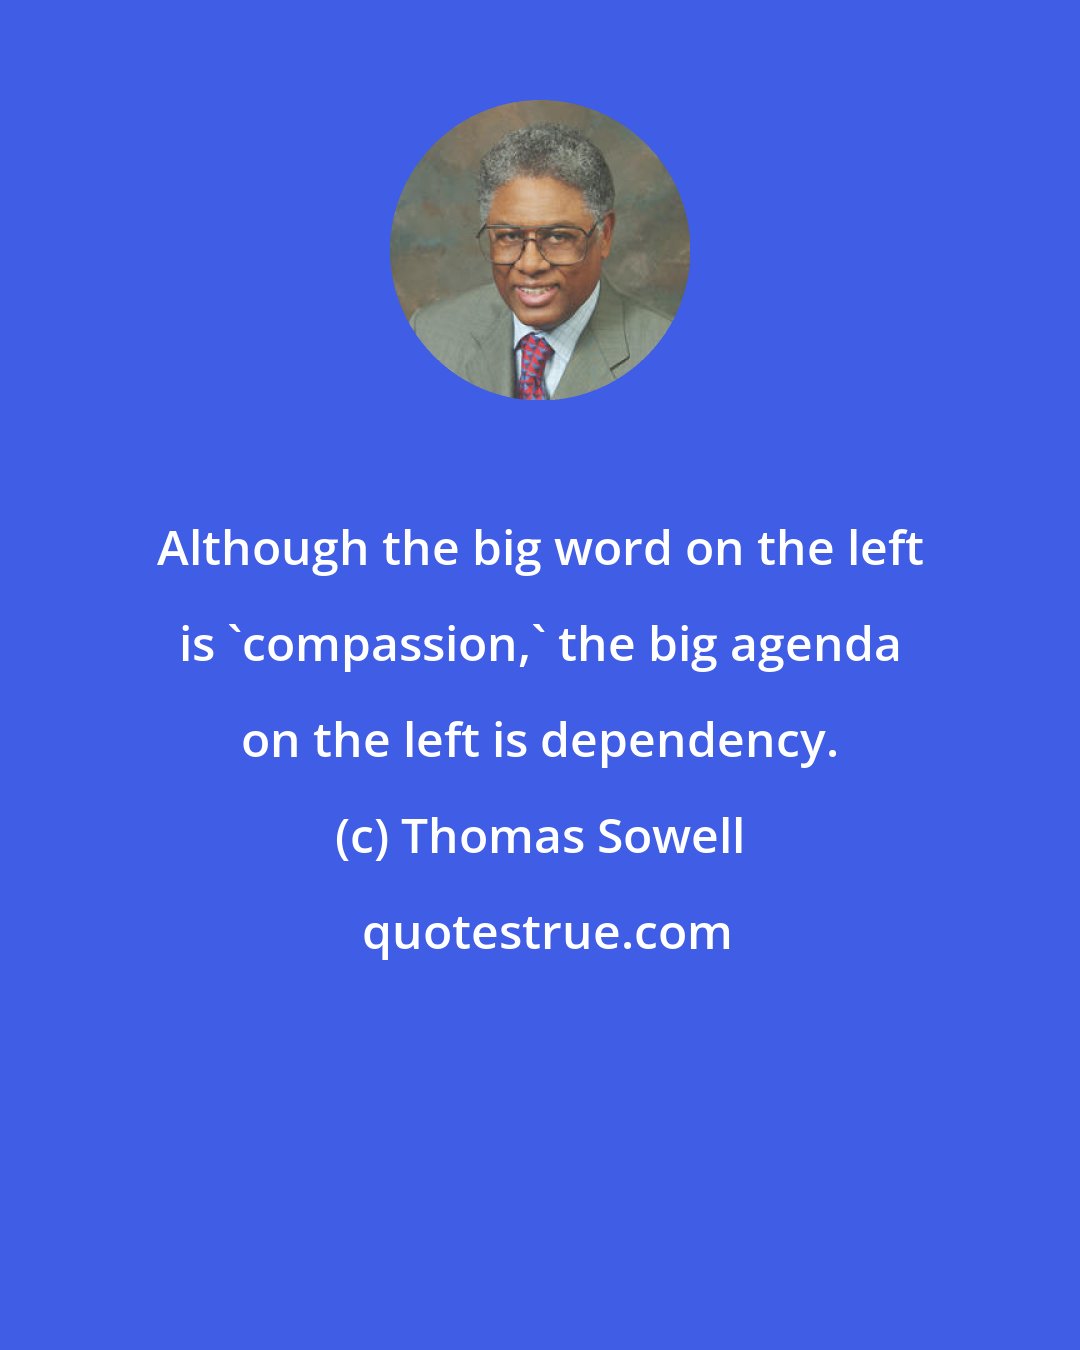 Thomas Sowell: Although the big word on the left is 'compassion,' the big agenda on the left is dependency.